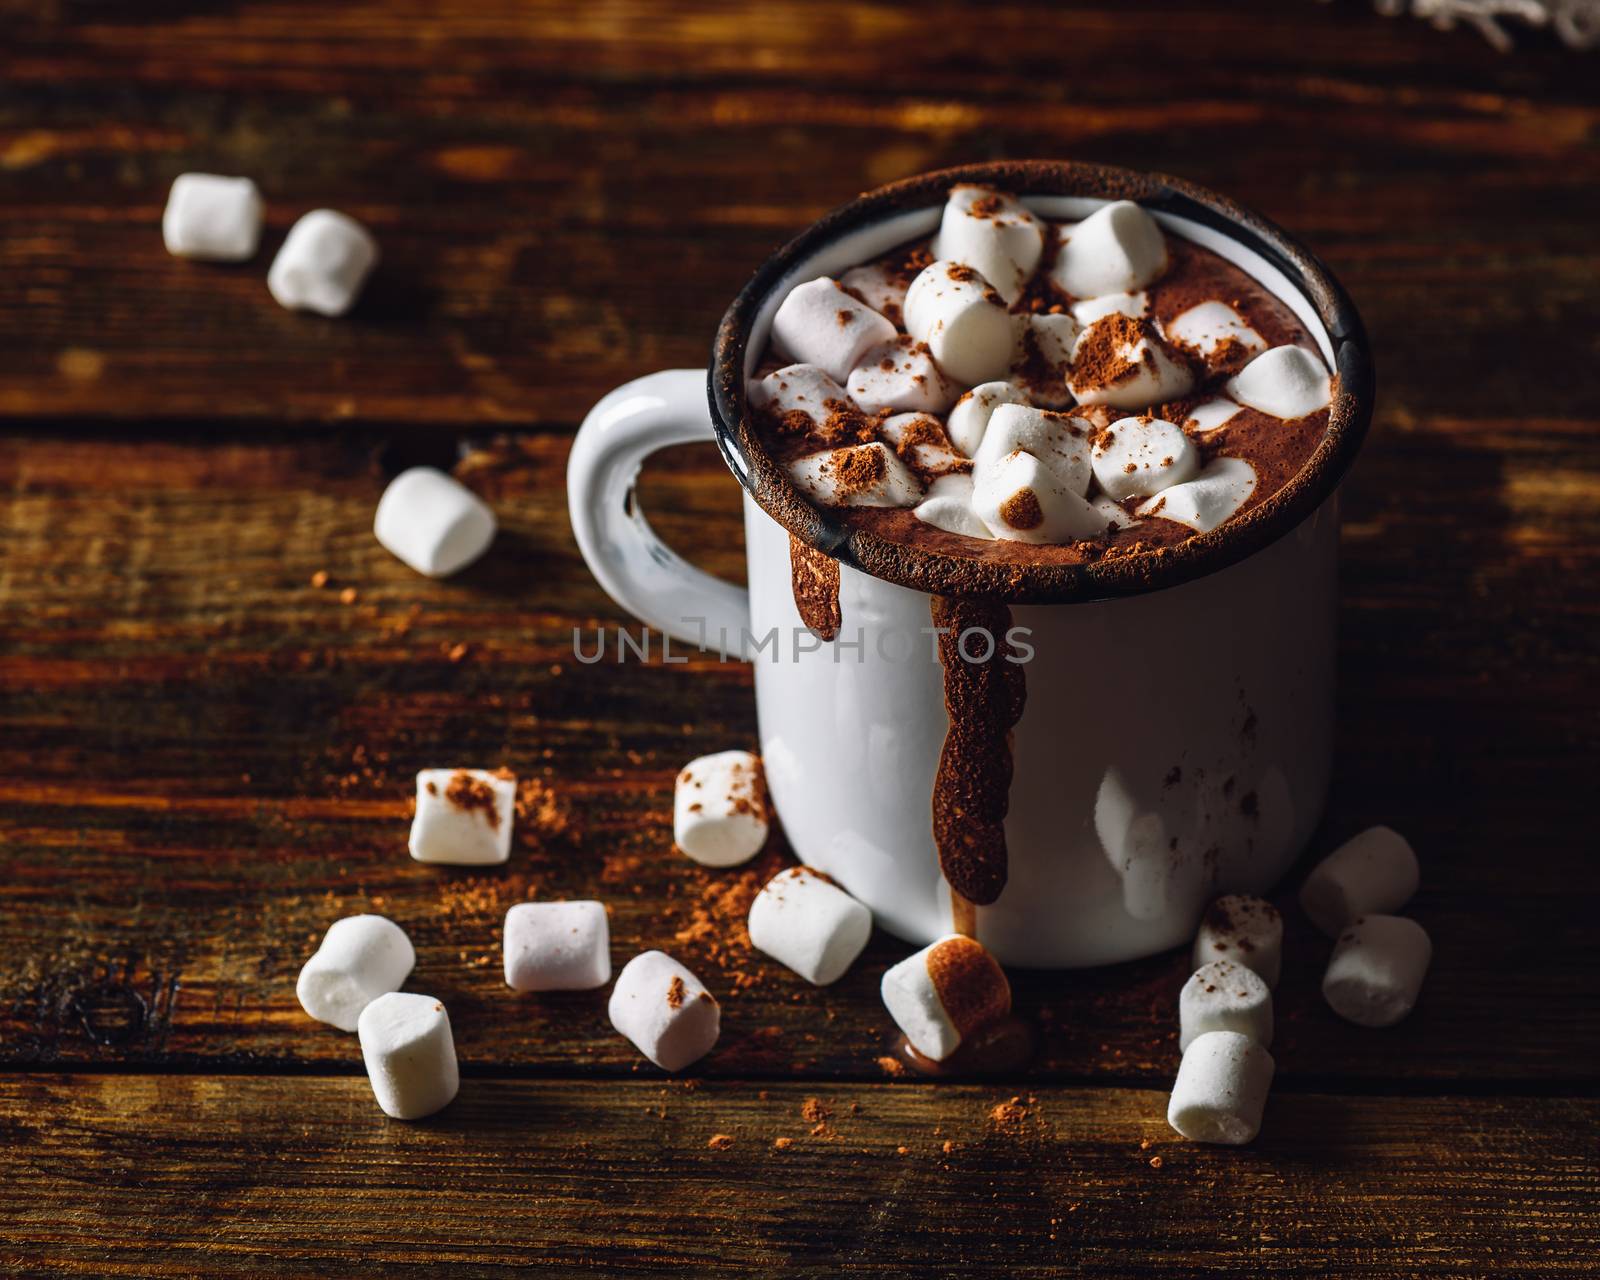 Cocoa Mug with Marshmallows. Some Marshmallow and Cocoa Powder Scattered on Wooden Table.